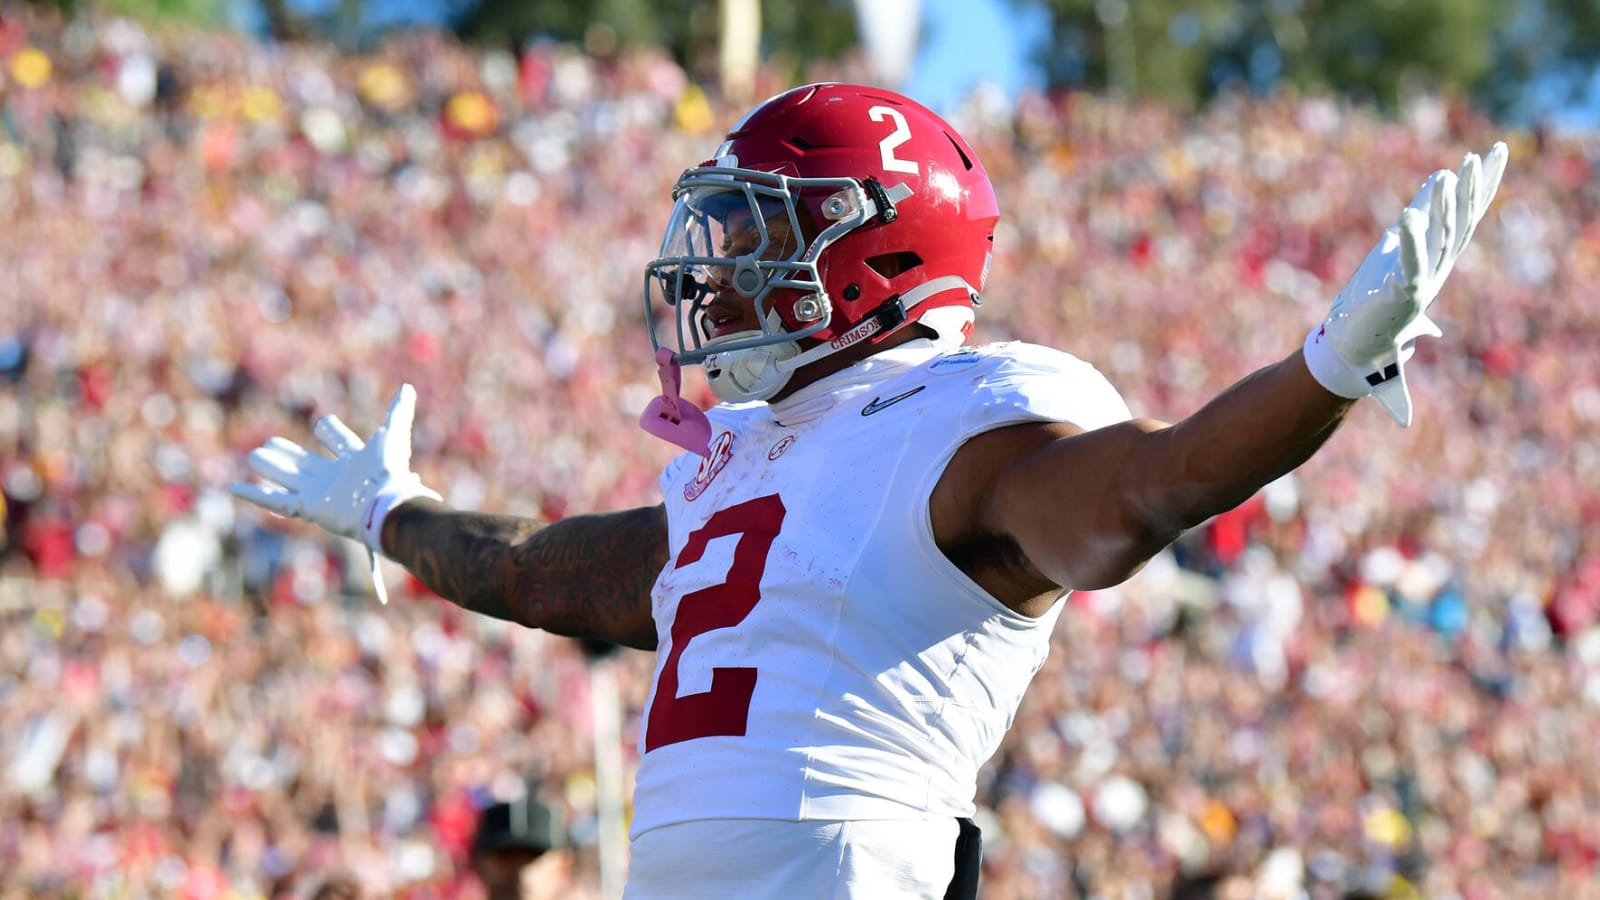 Watch: Alabama draws first blood in semifinal with TD run